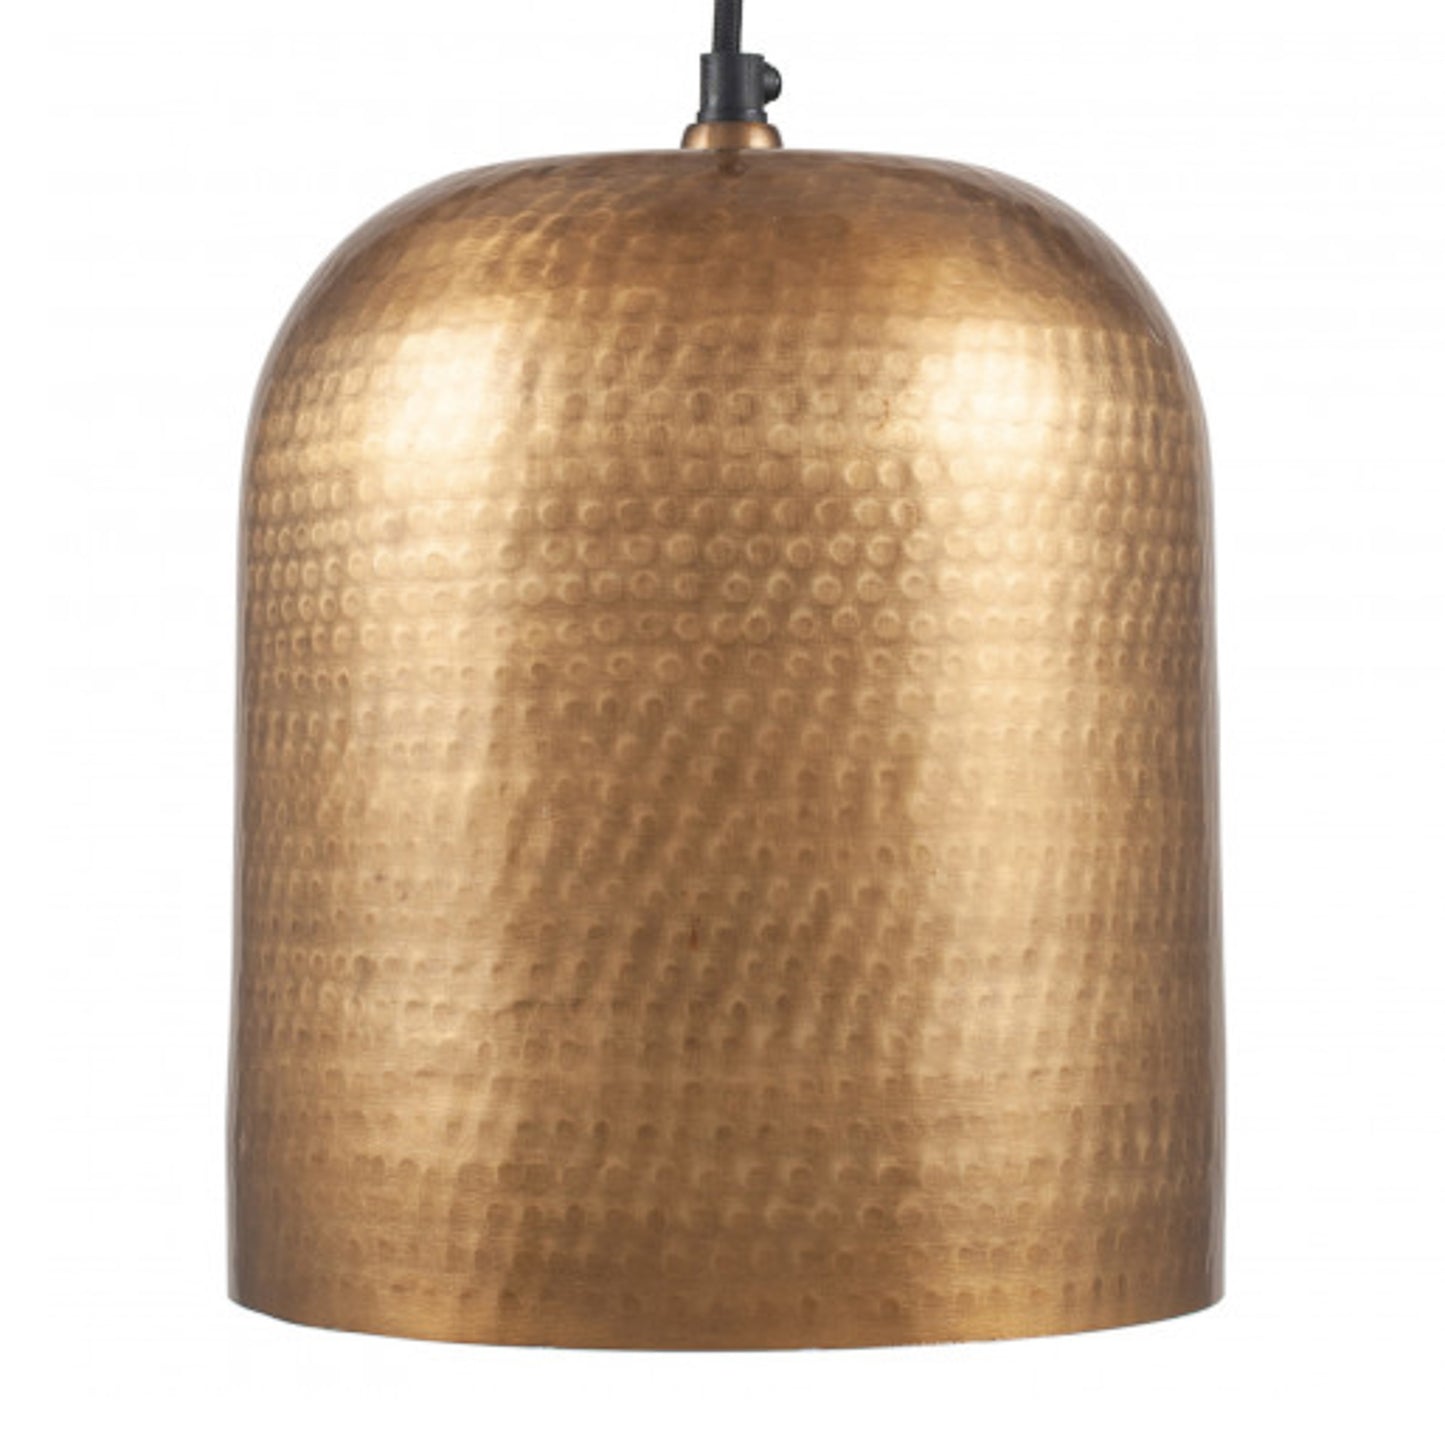 Gold Hammered Metal Dome Pendant